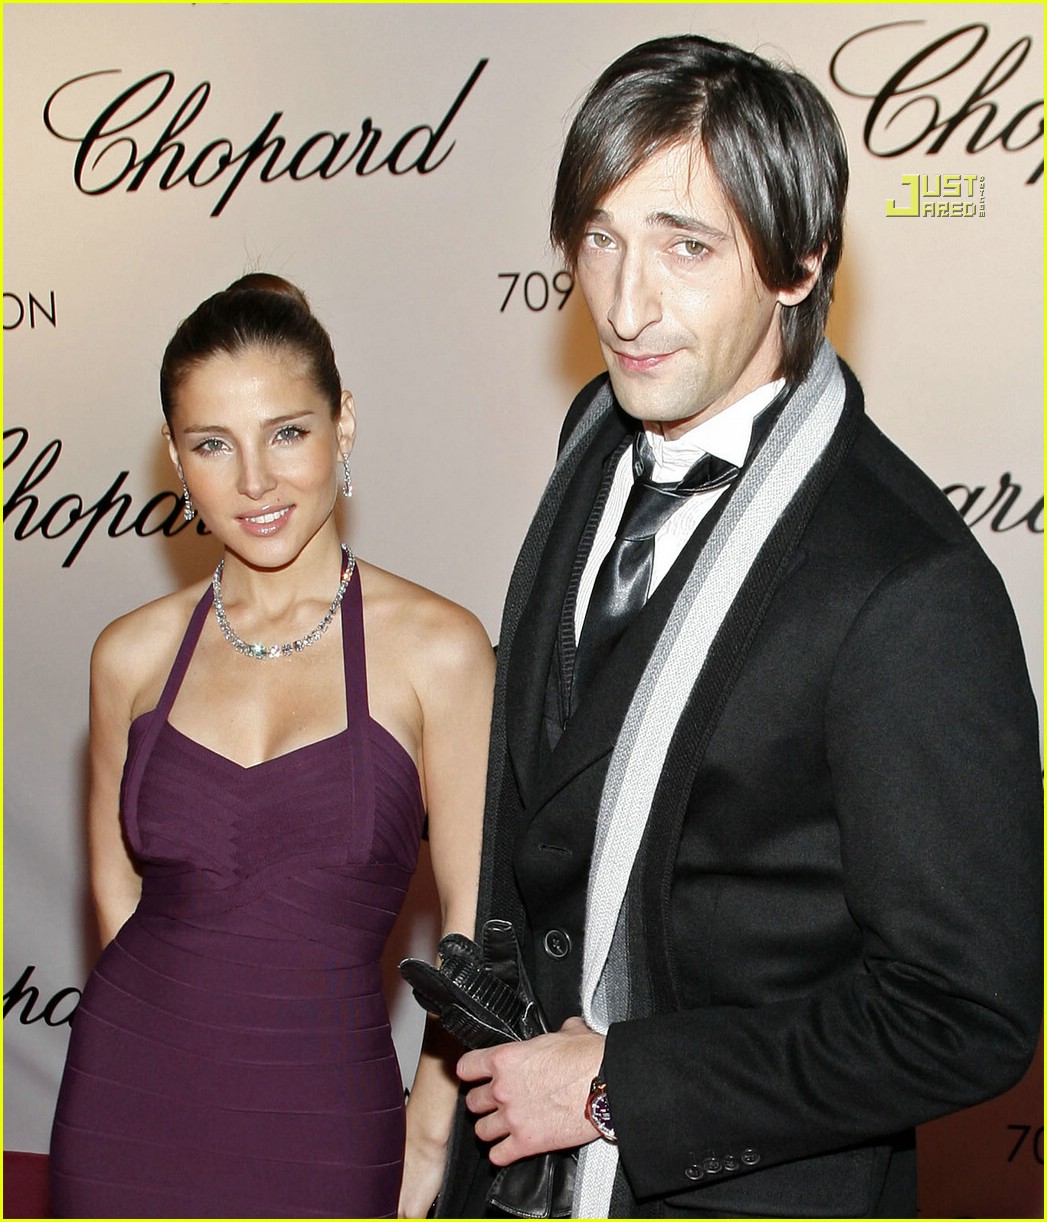 Adrien Brody and Spanish actress girlfriend Elsa Pataky walk down the red c...